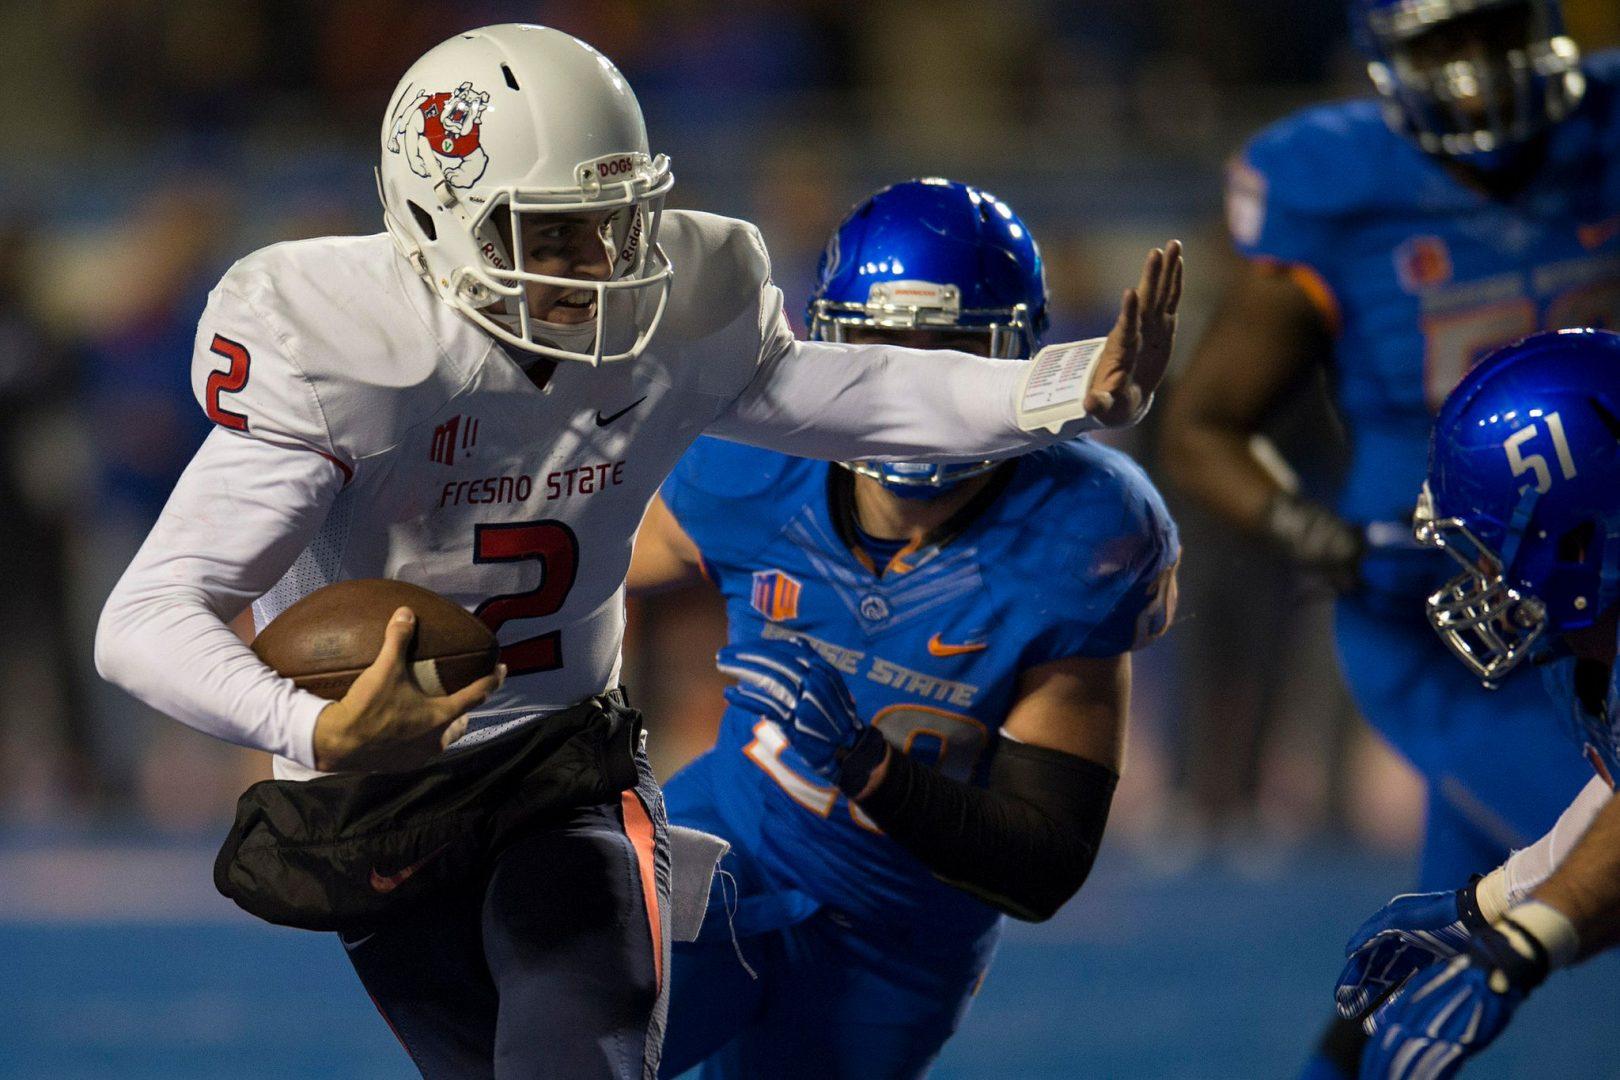 Fresno State quarterback Brian Burrell rushes through Boise States defense during the Dogs loss to the Broncos in the Mountain West Championship. Photo courtesy of NCAA Photos